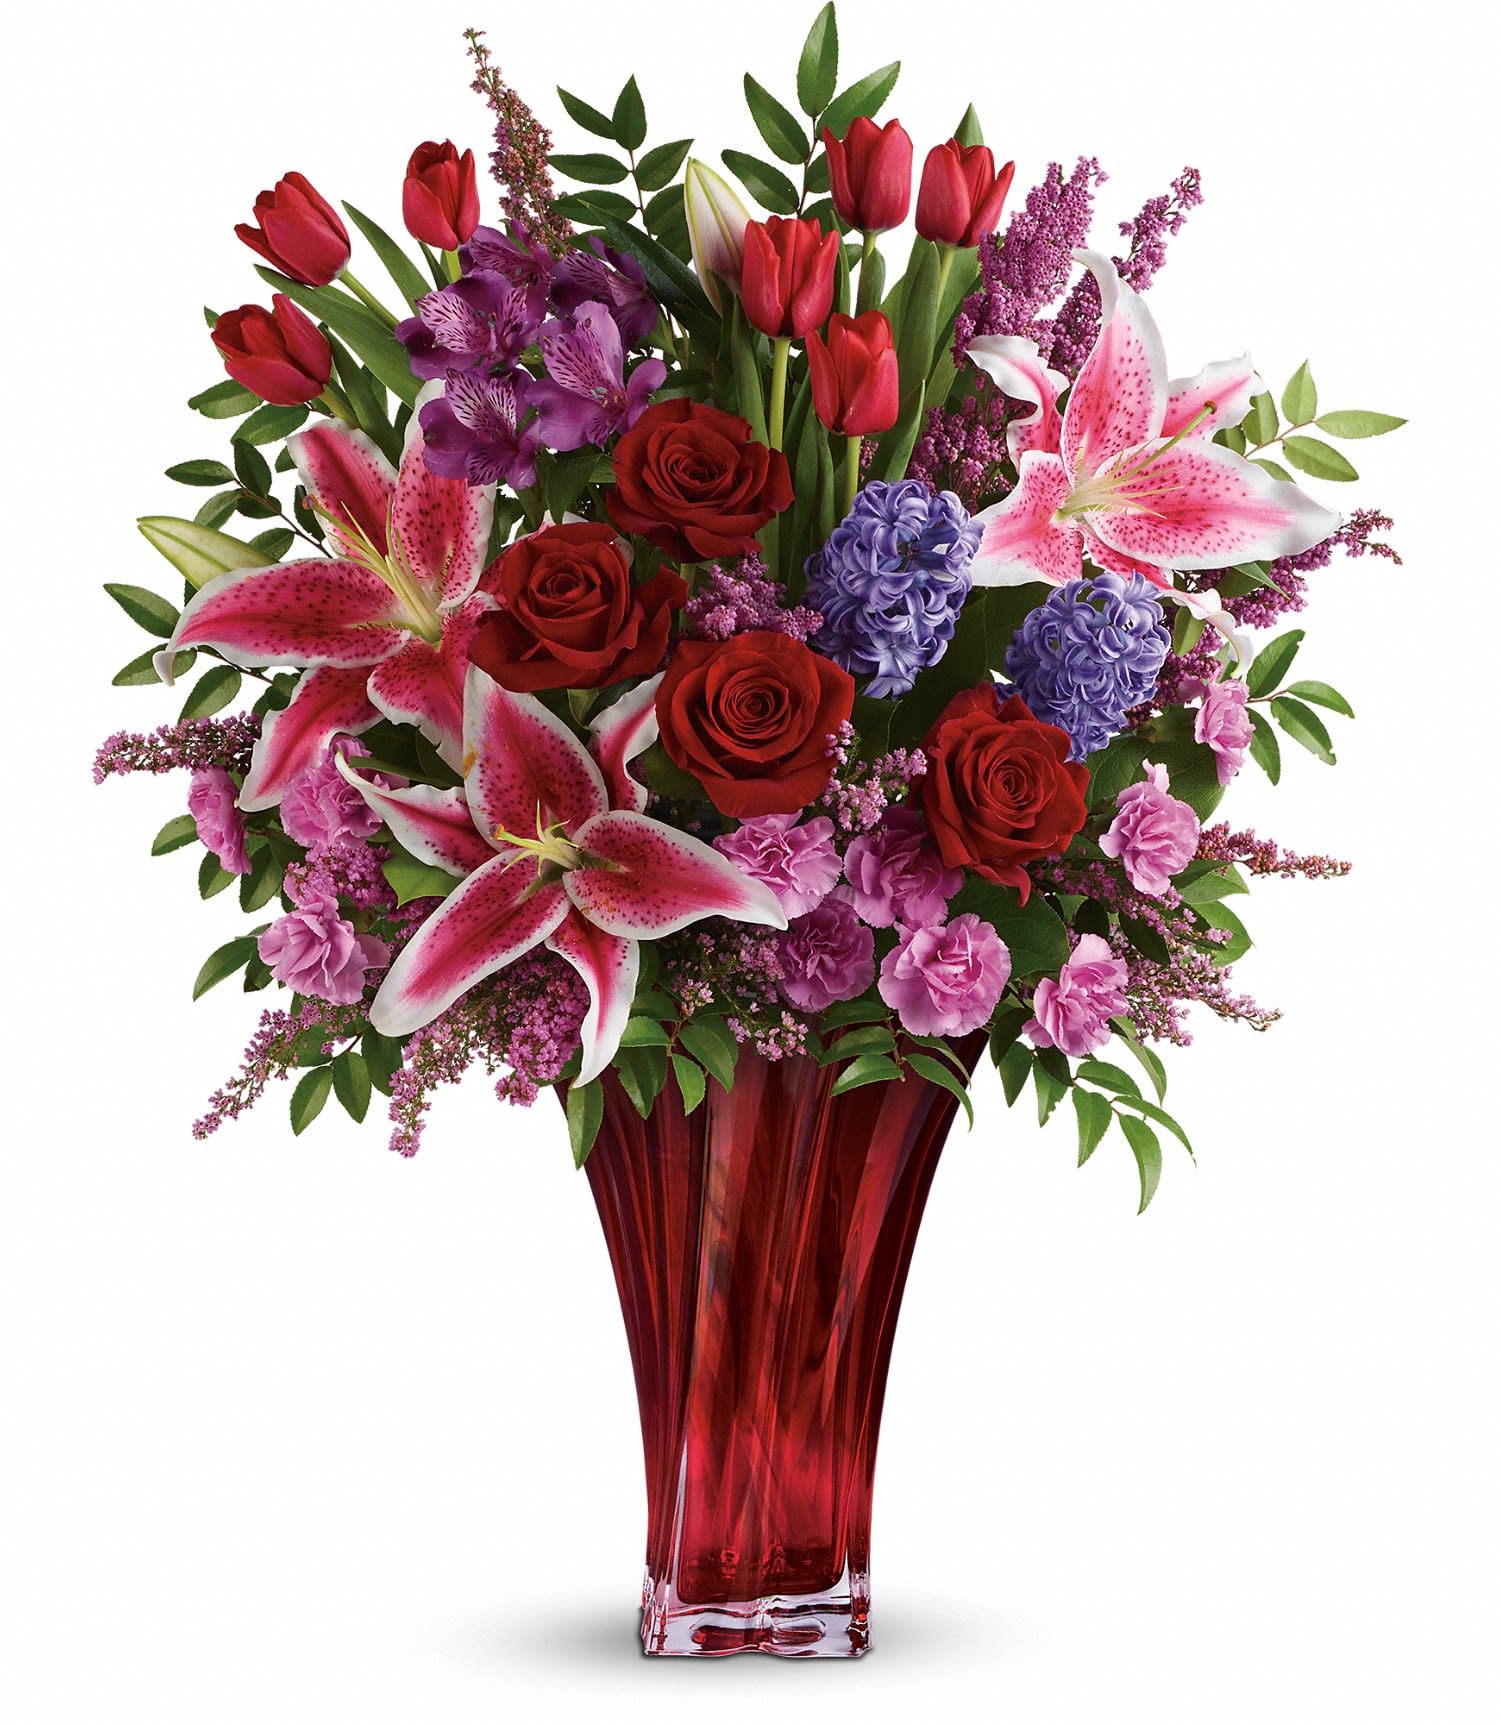 One Of A Kind Love Bouquet by Teleflora PM - For a love that's truly one of a kind. Celebrate your unique bond this Valentine's Day with this magnificent bouquet of roses, lilies, alstroemeria and more, artfully arranged in an elegant red blown-glass vase. Dazzling with graceful details, it's a true décor piece they'll enjoy forever as a resplendent reminder of your love. 